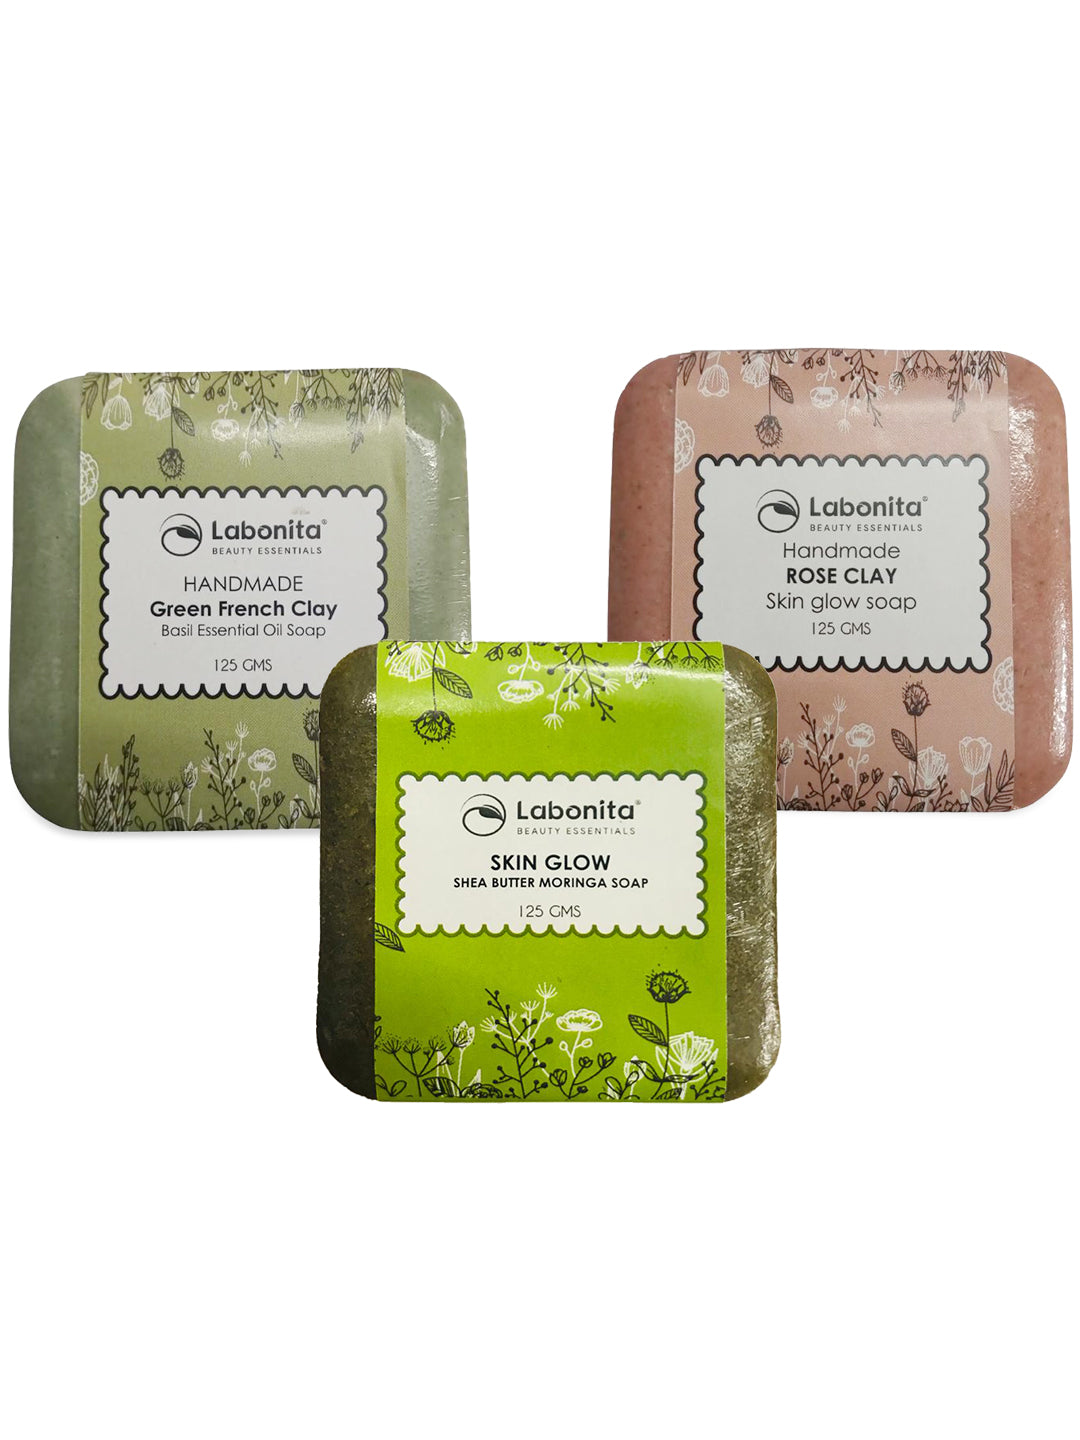 Dry Skin & Deep Moisturizing Soap Combo Pack of Green French, Rose clay, Shea Butter Moringa Soap